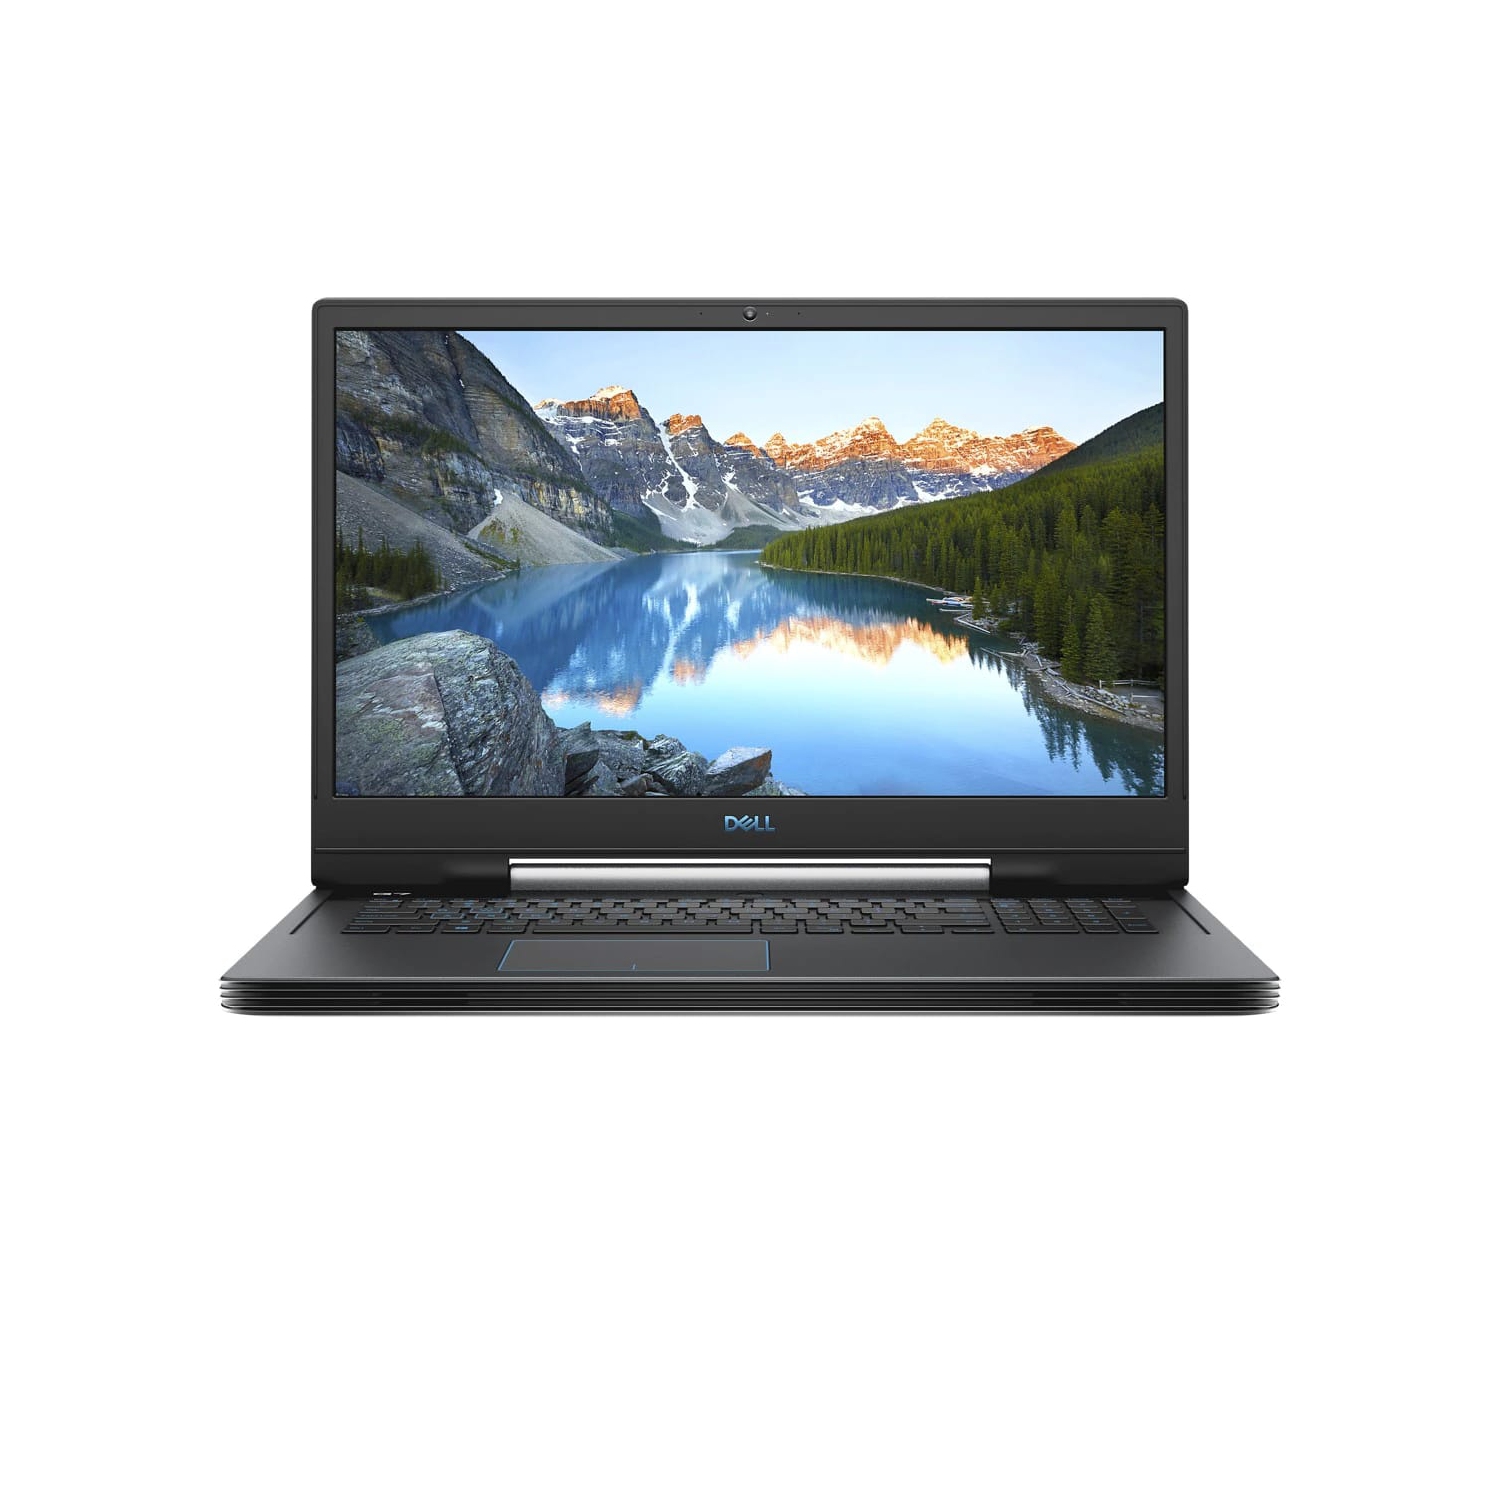 Refurbished (Excellent) – Dell G7 7790 Gaming Laptop (2019) | 17.3" FHD | Core i7 - 1TB HDD - 16GB RAM | 6 Cores @ 4.5 GHz